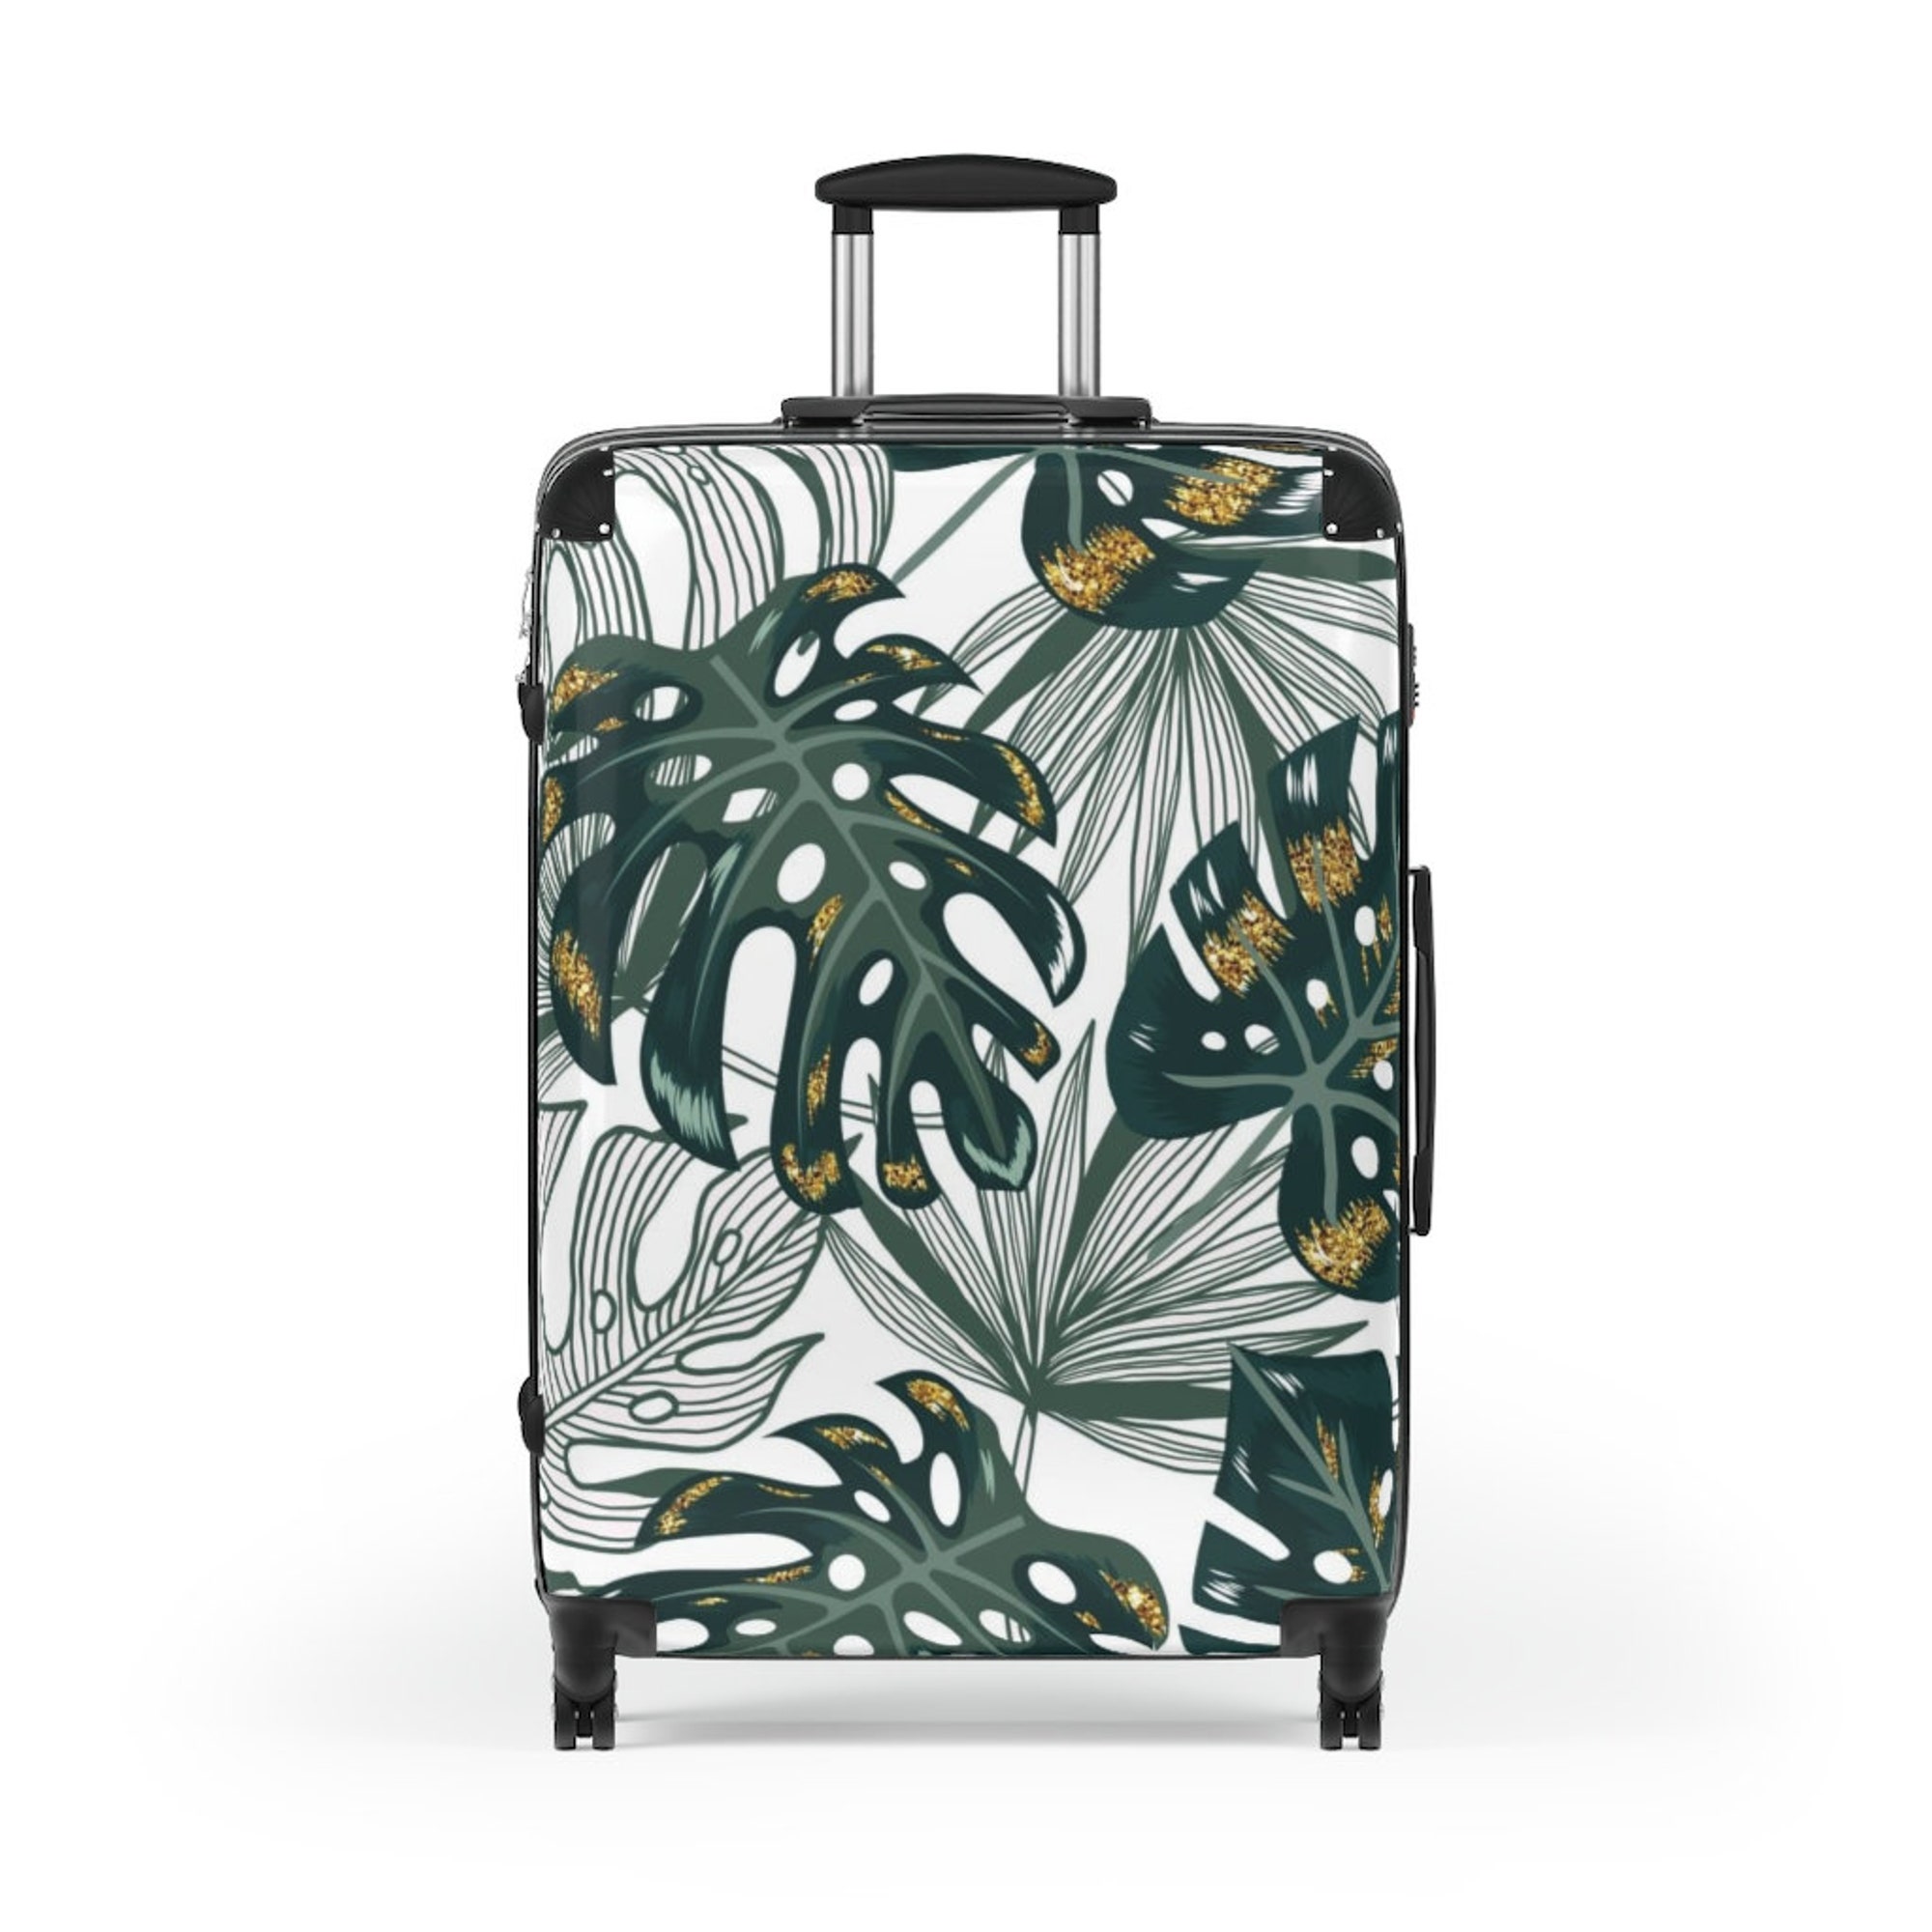 Discover The Tropical Palms Suitcase